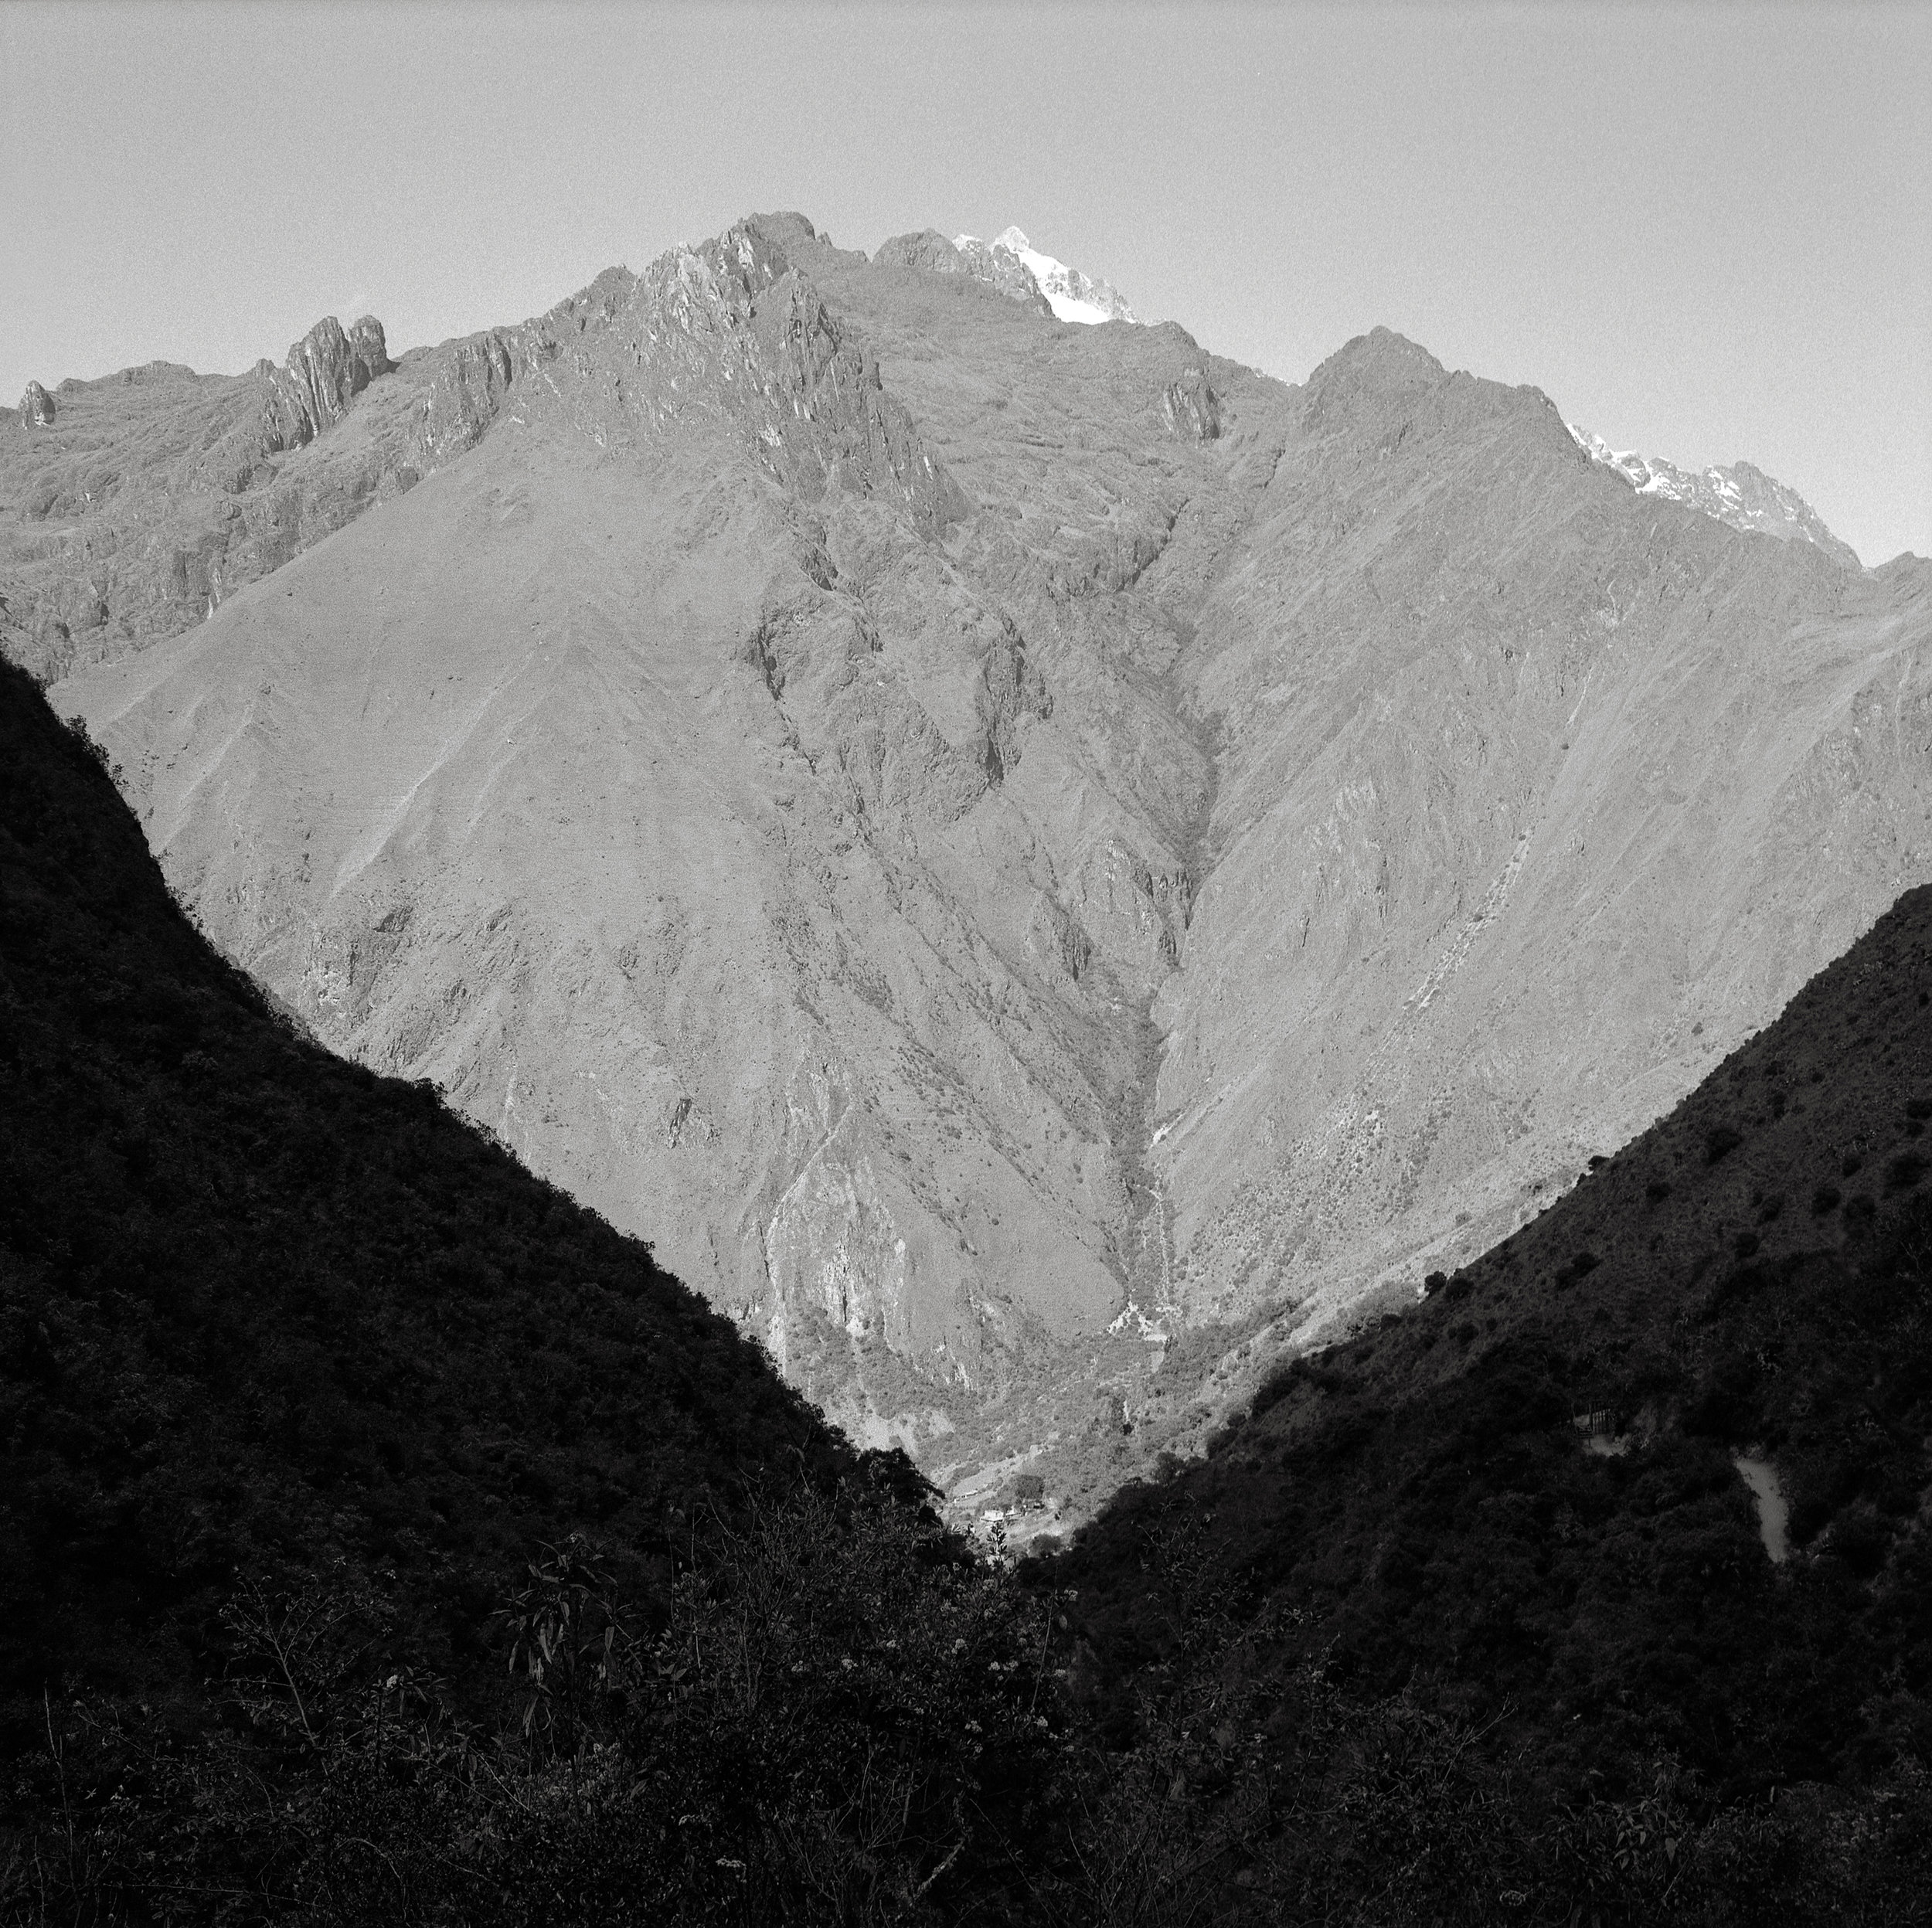 Salkantay from the Valley of Llulluchapampa, Peru